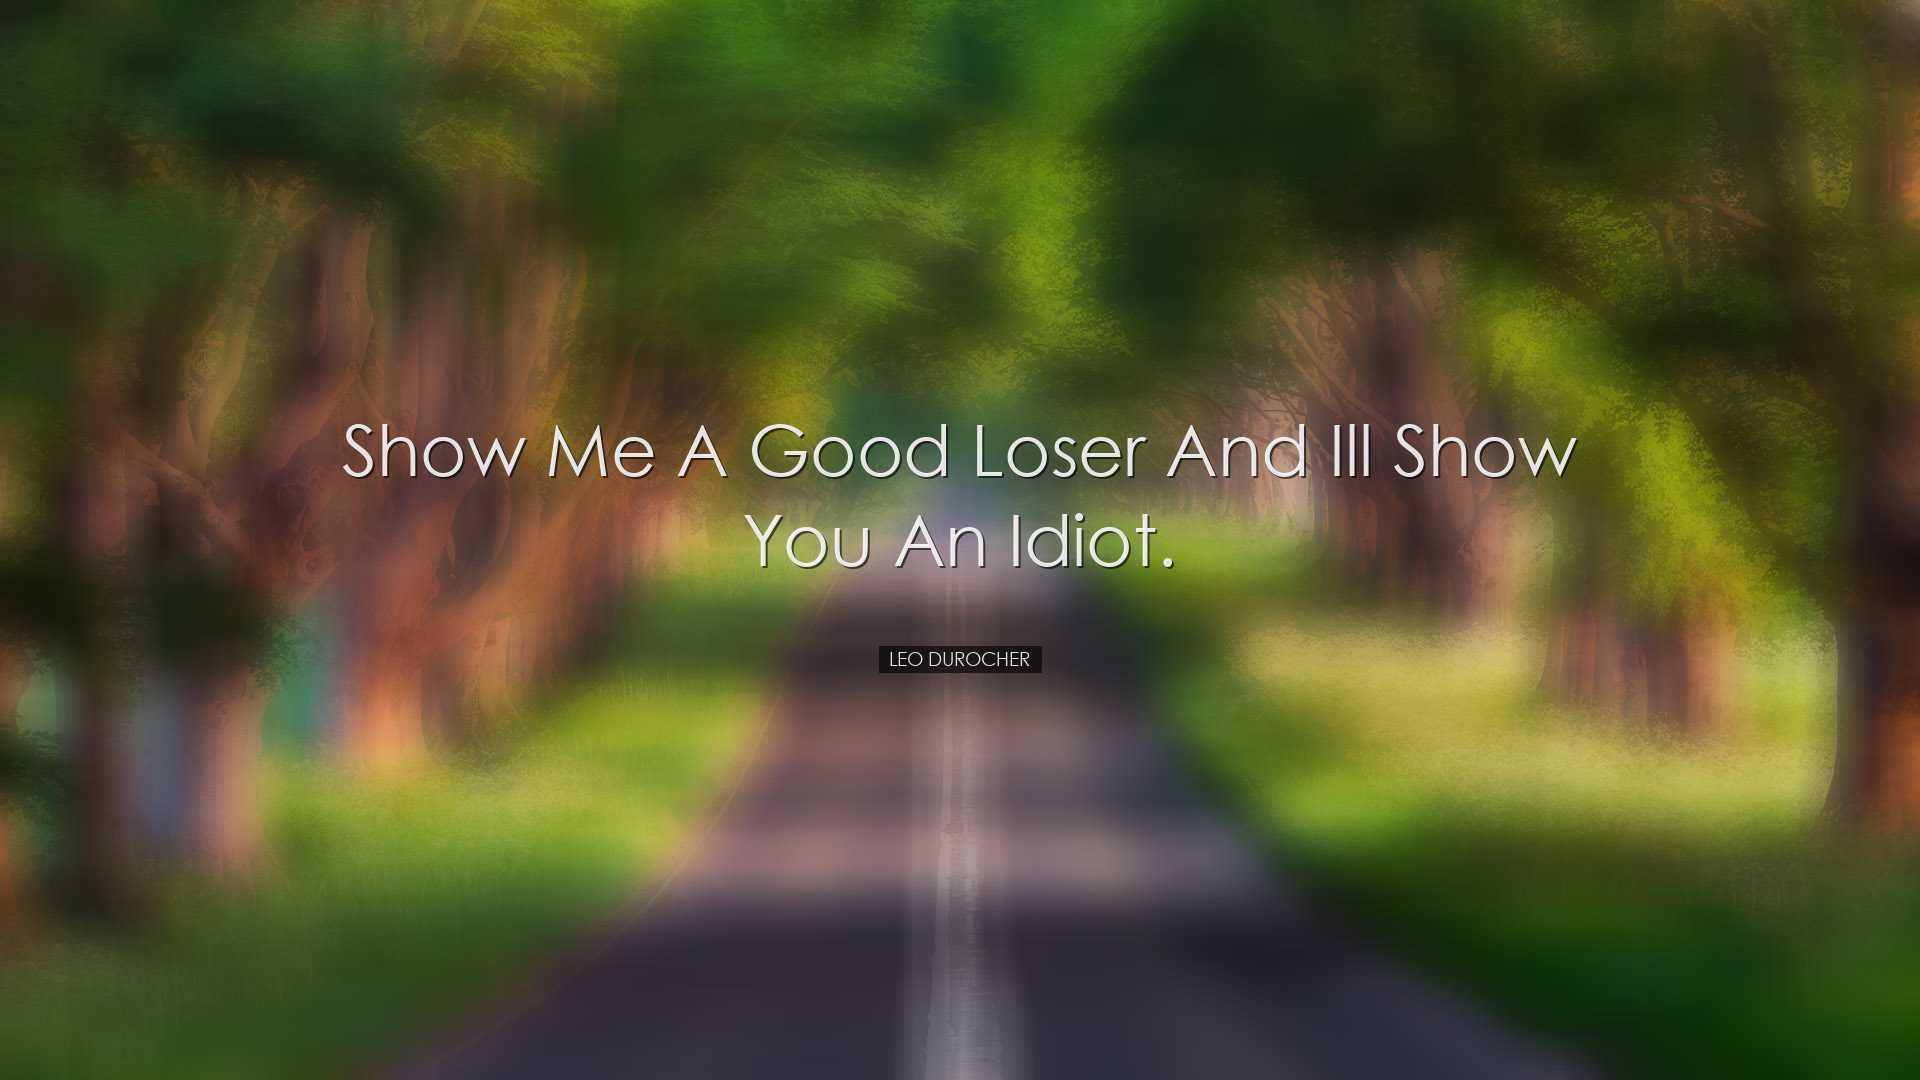 Show me a good loser and Ill show you an idiot. - Leo Durocher